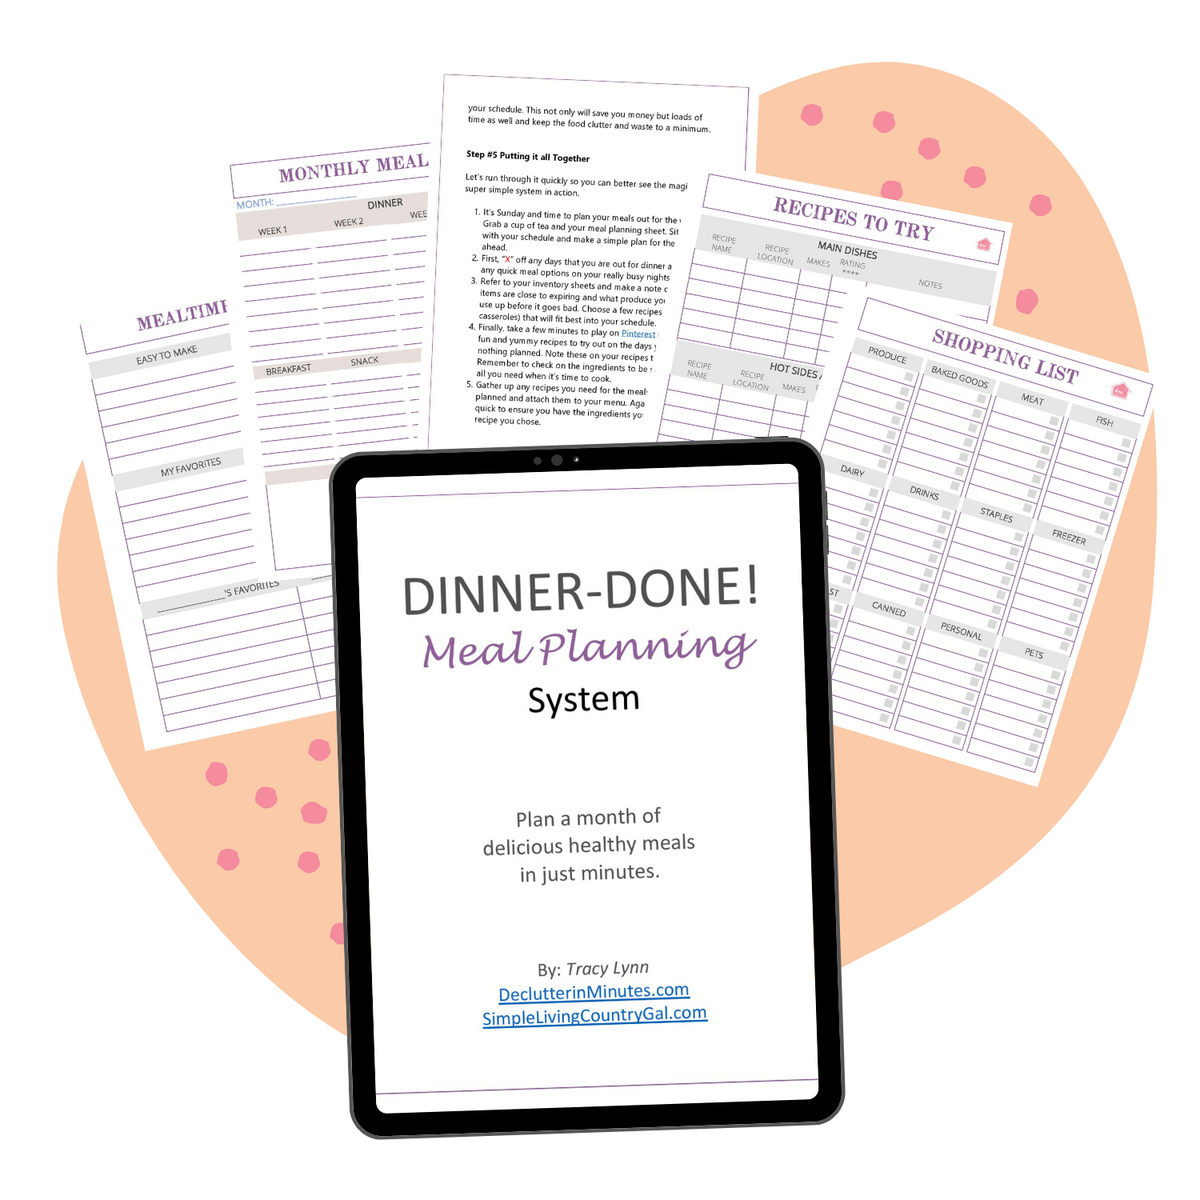 Menu Planning Products